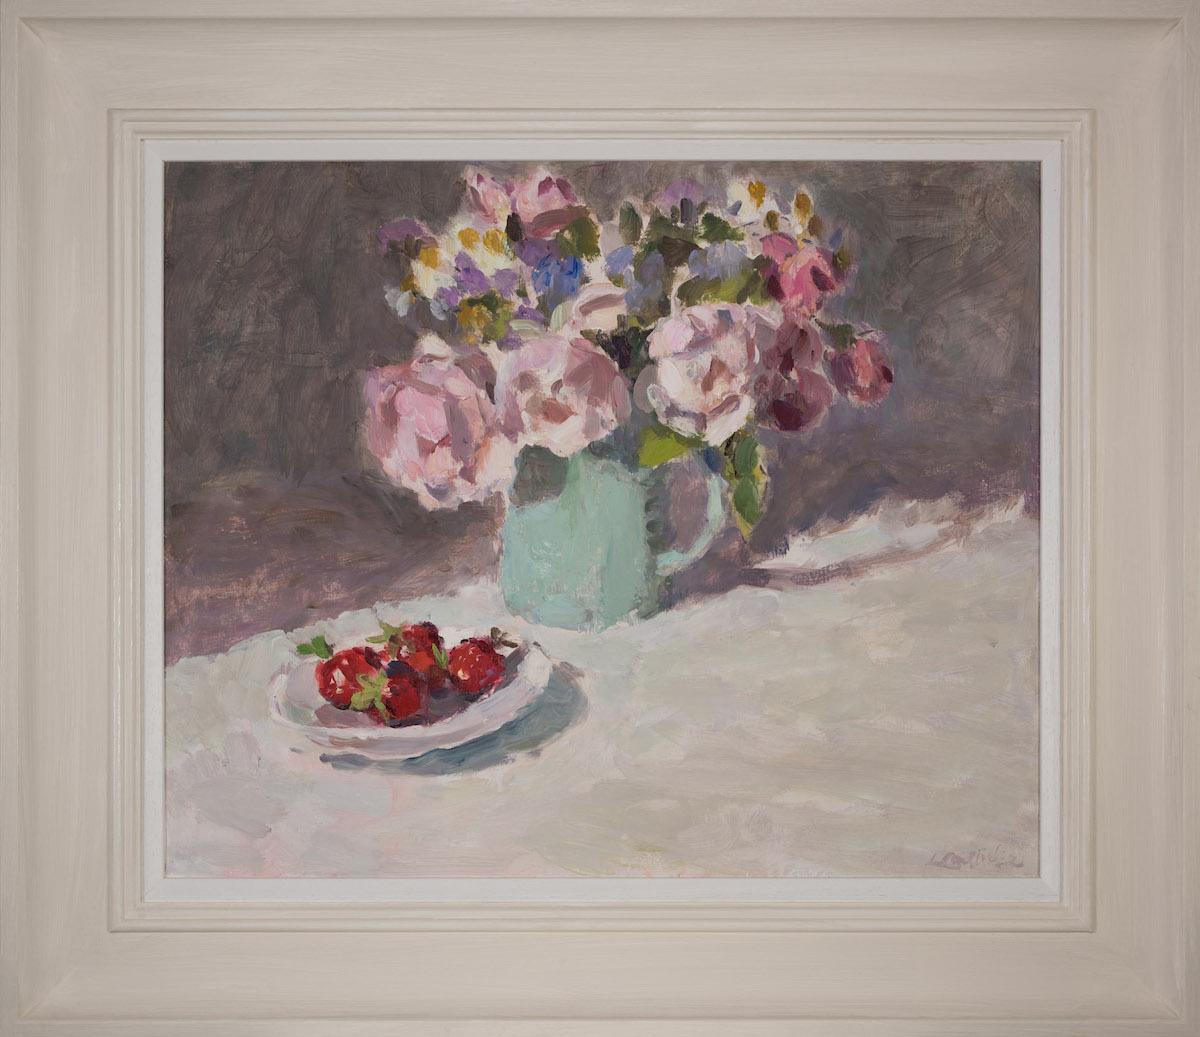 Roses in Blue Jug with Strawberries by Lynne Cartlidge, Impressionist inspired 